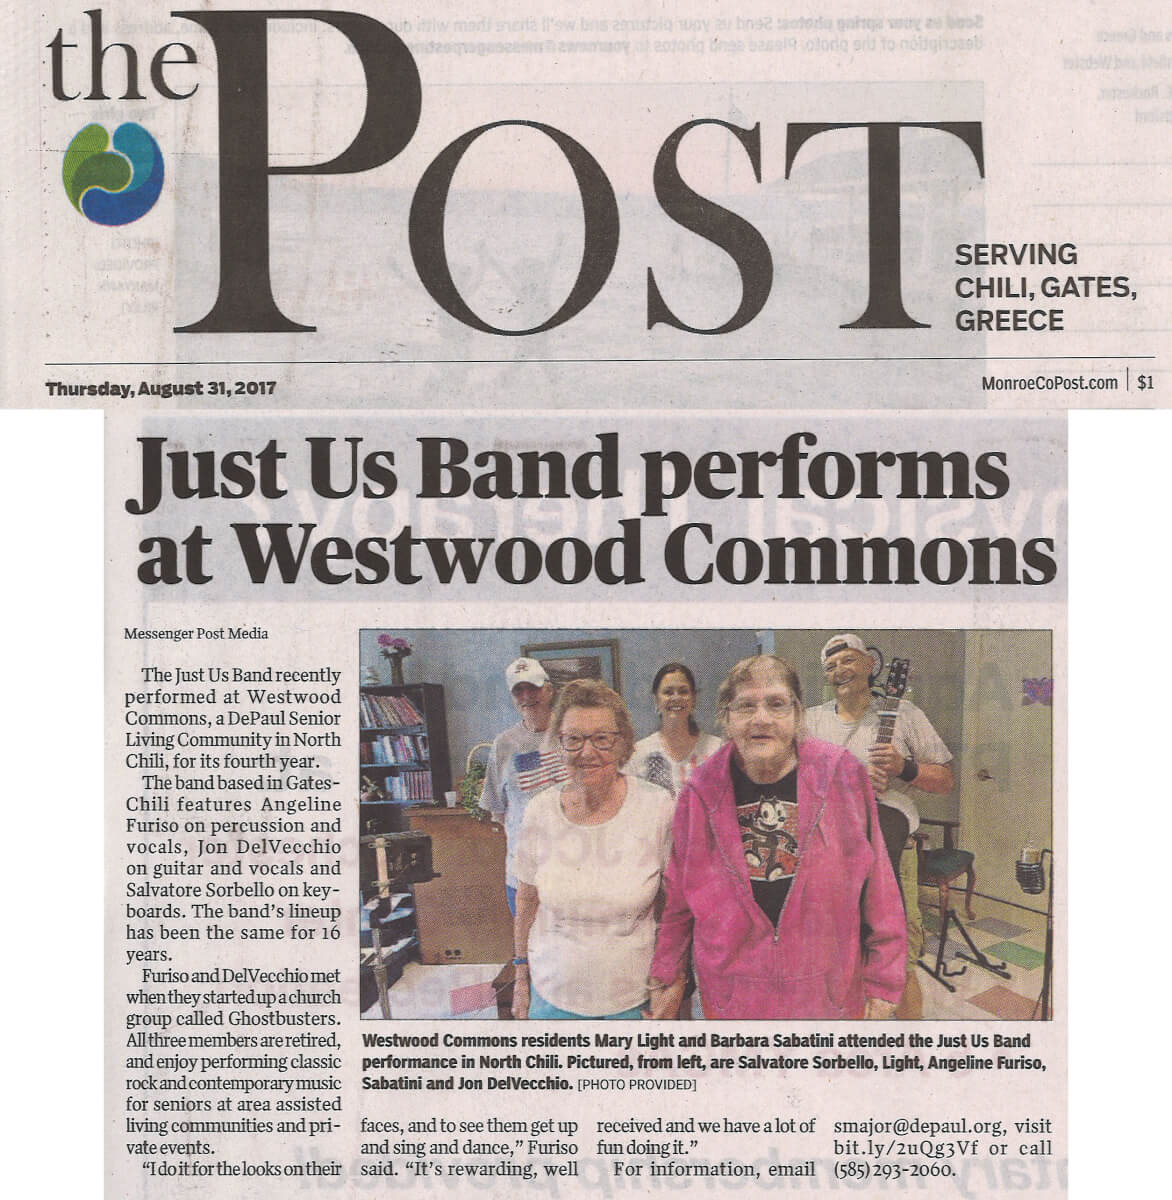 Just Us Band performs at Westwood Commons story in the Post August 31, 2017